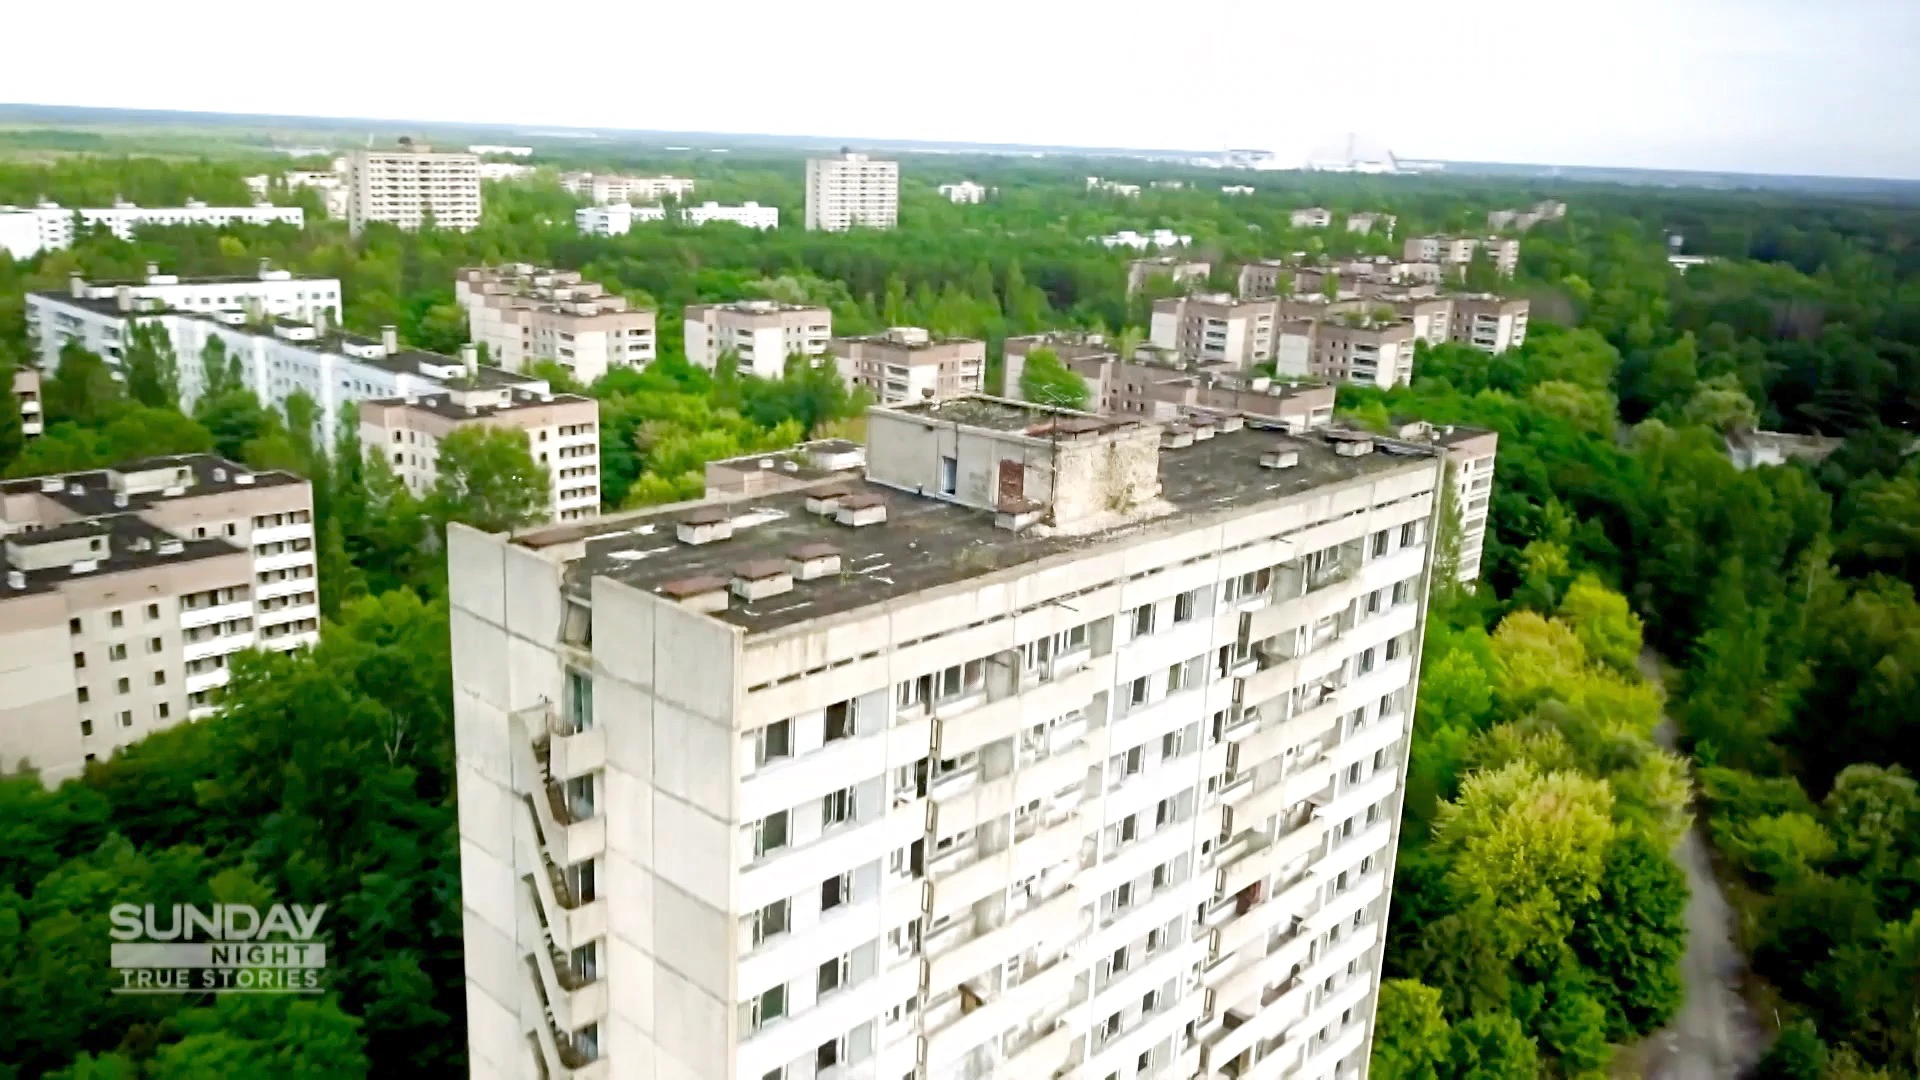 The once-thriving city of Pripyat lies deserted after the Chernobyl nuclear disaster.